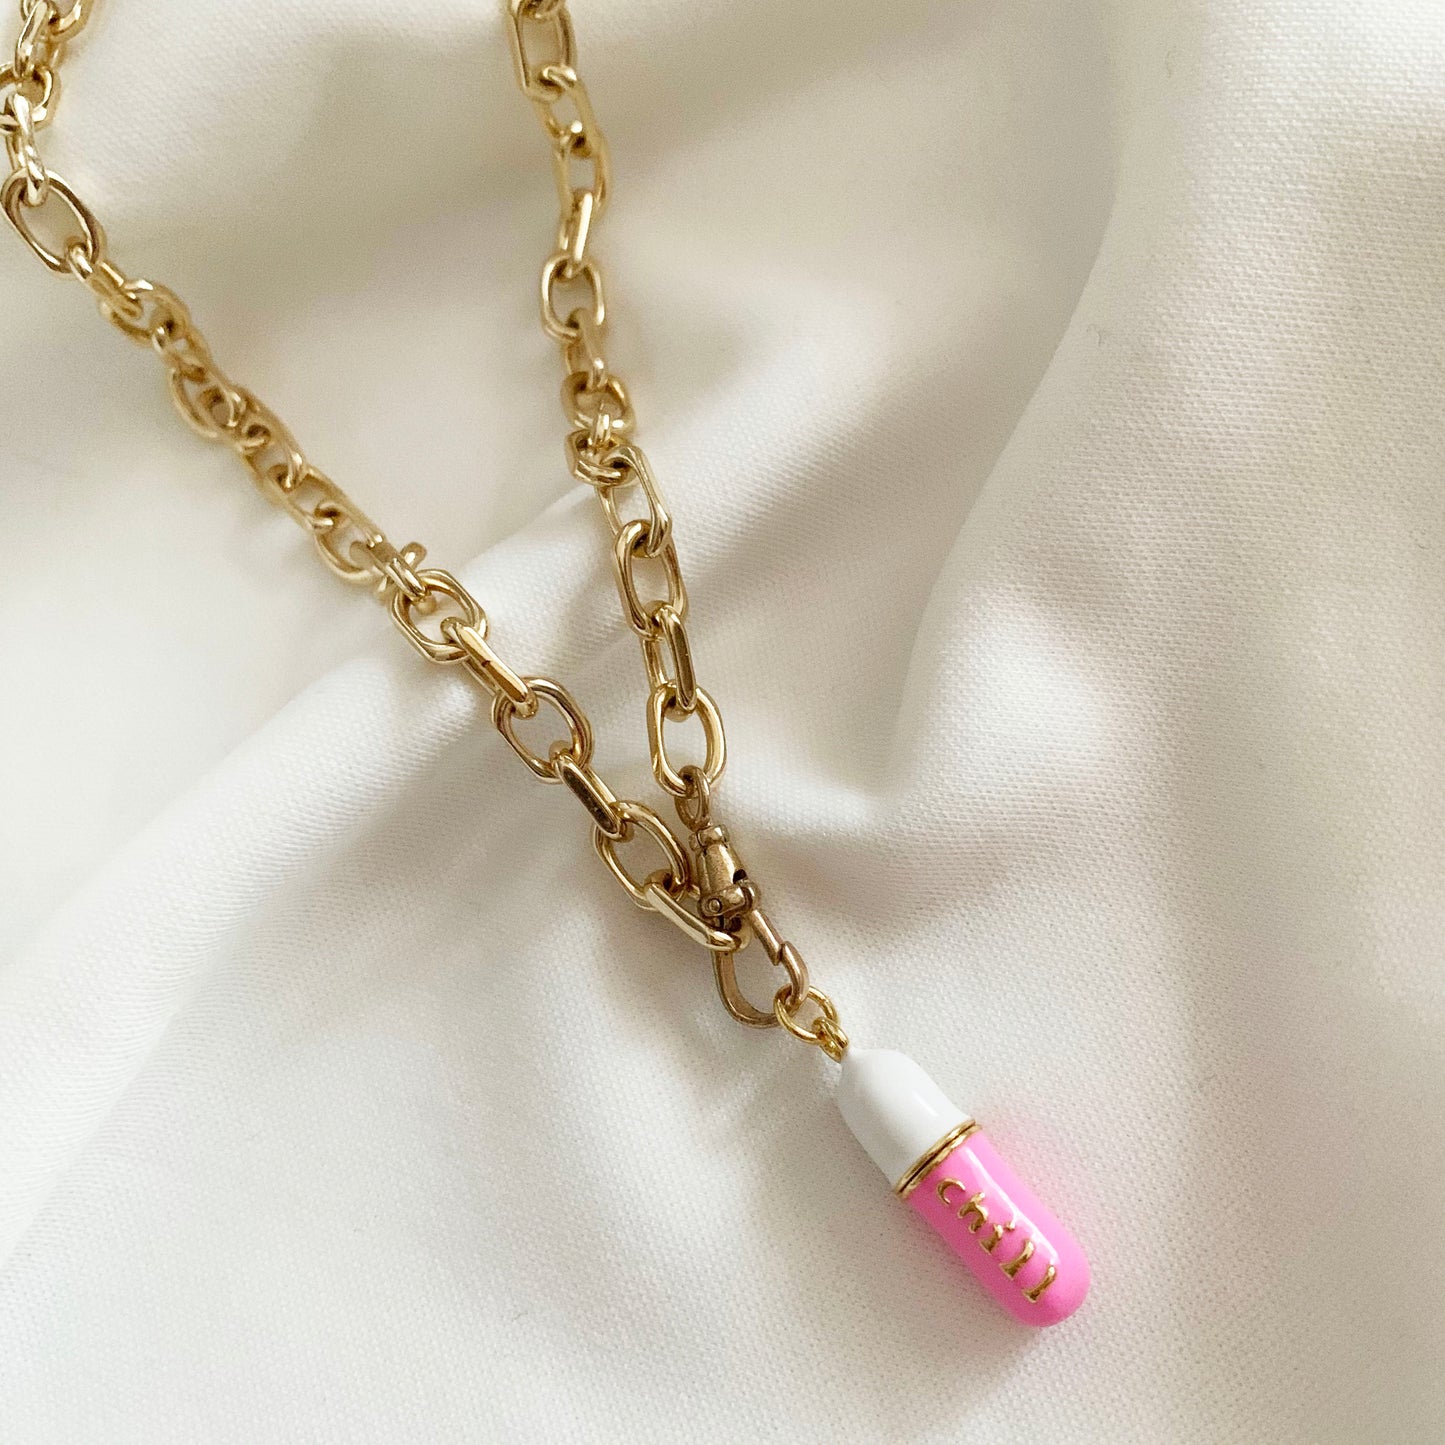 Gold Plated Necklace | Excludes Pill Charm